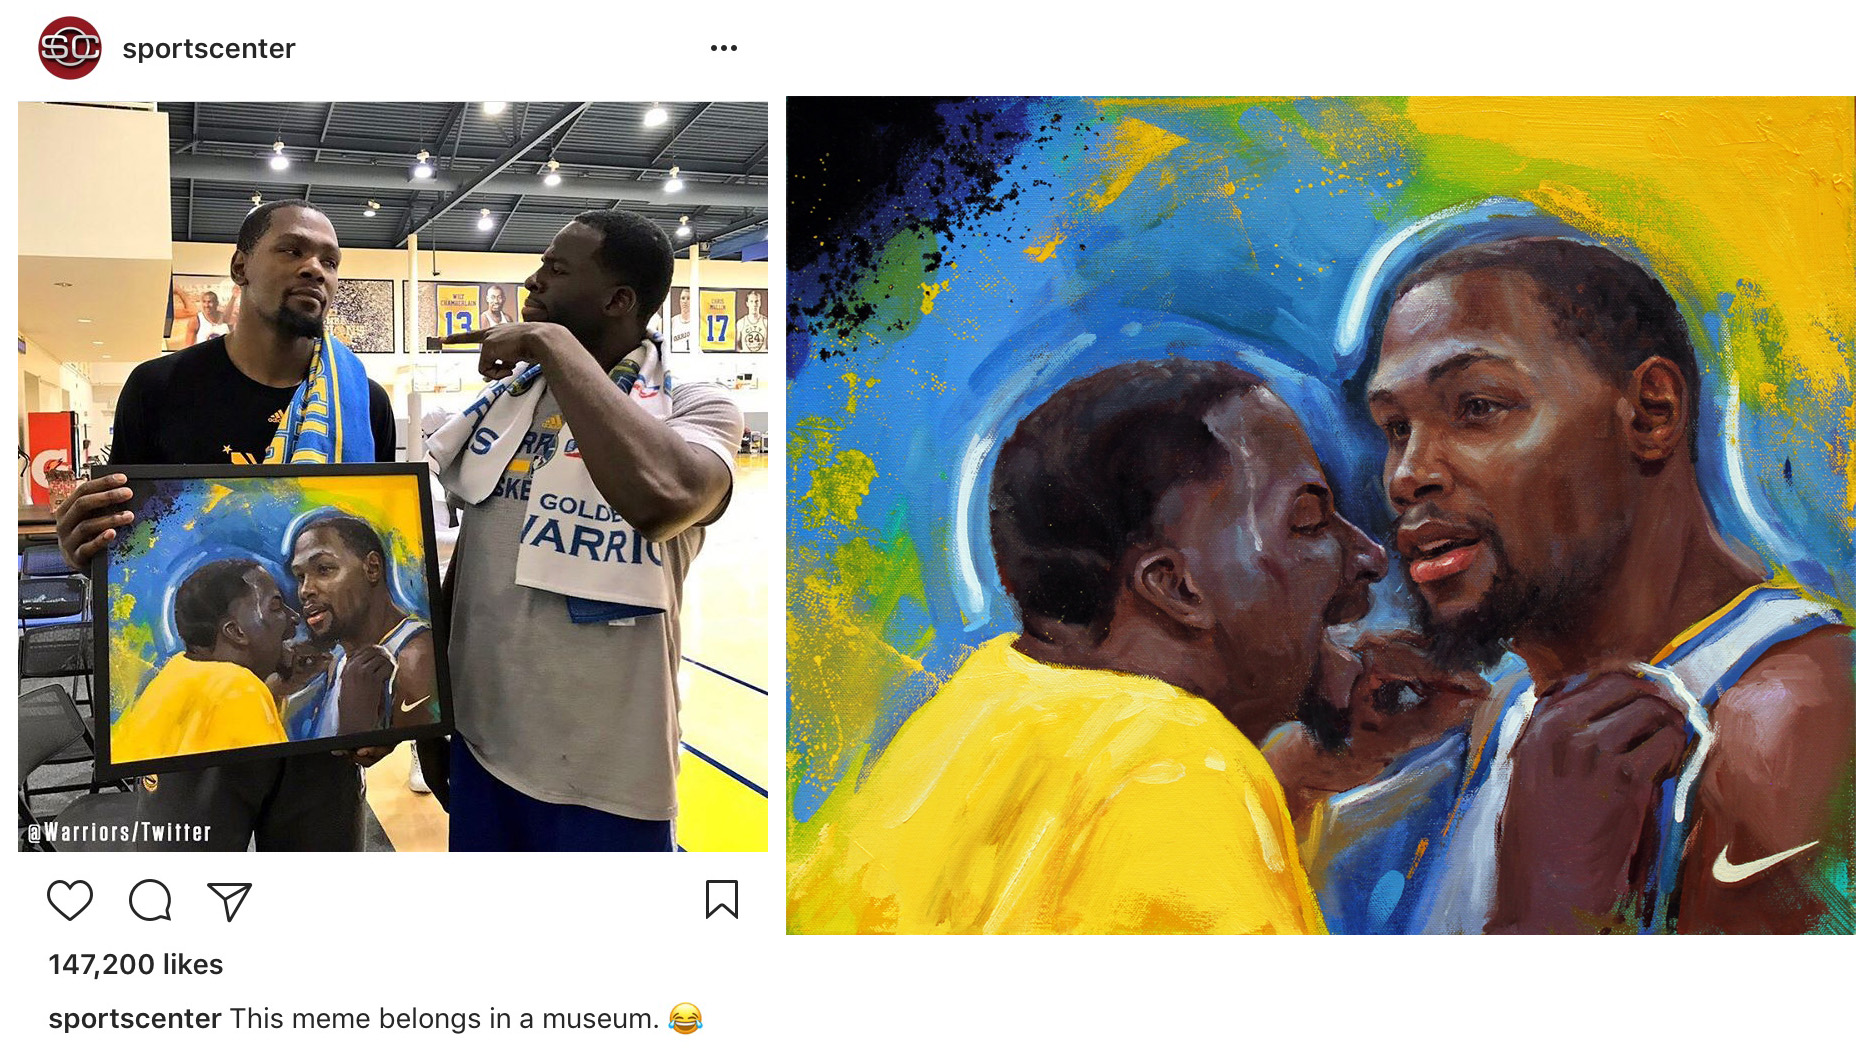 Social Media campaign for Nike NBA and space150 / Overnight portraits of NBA playoff moments / Kevin Durant and Draymond Green meme, 2017